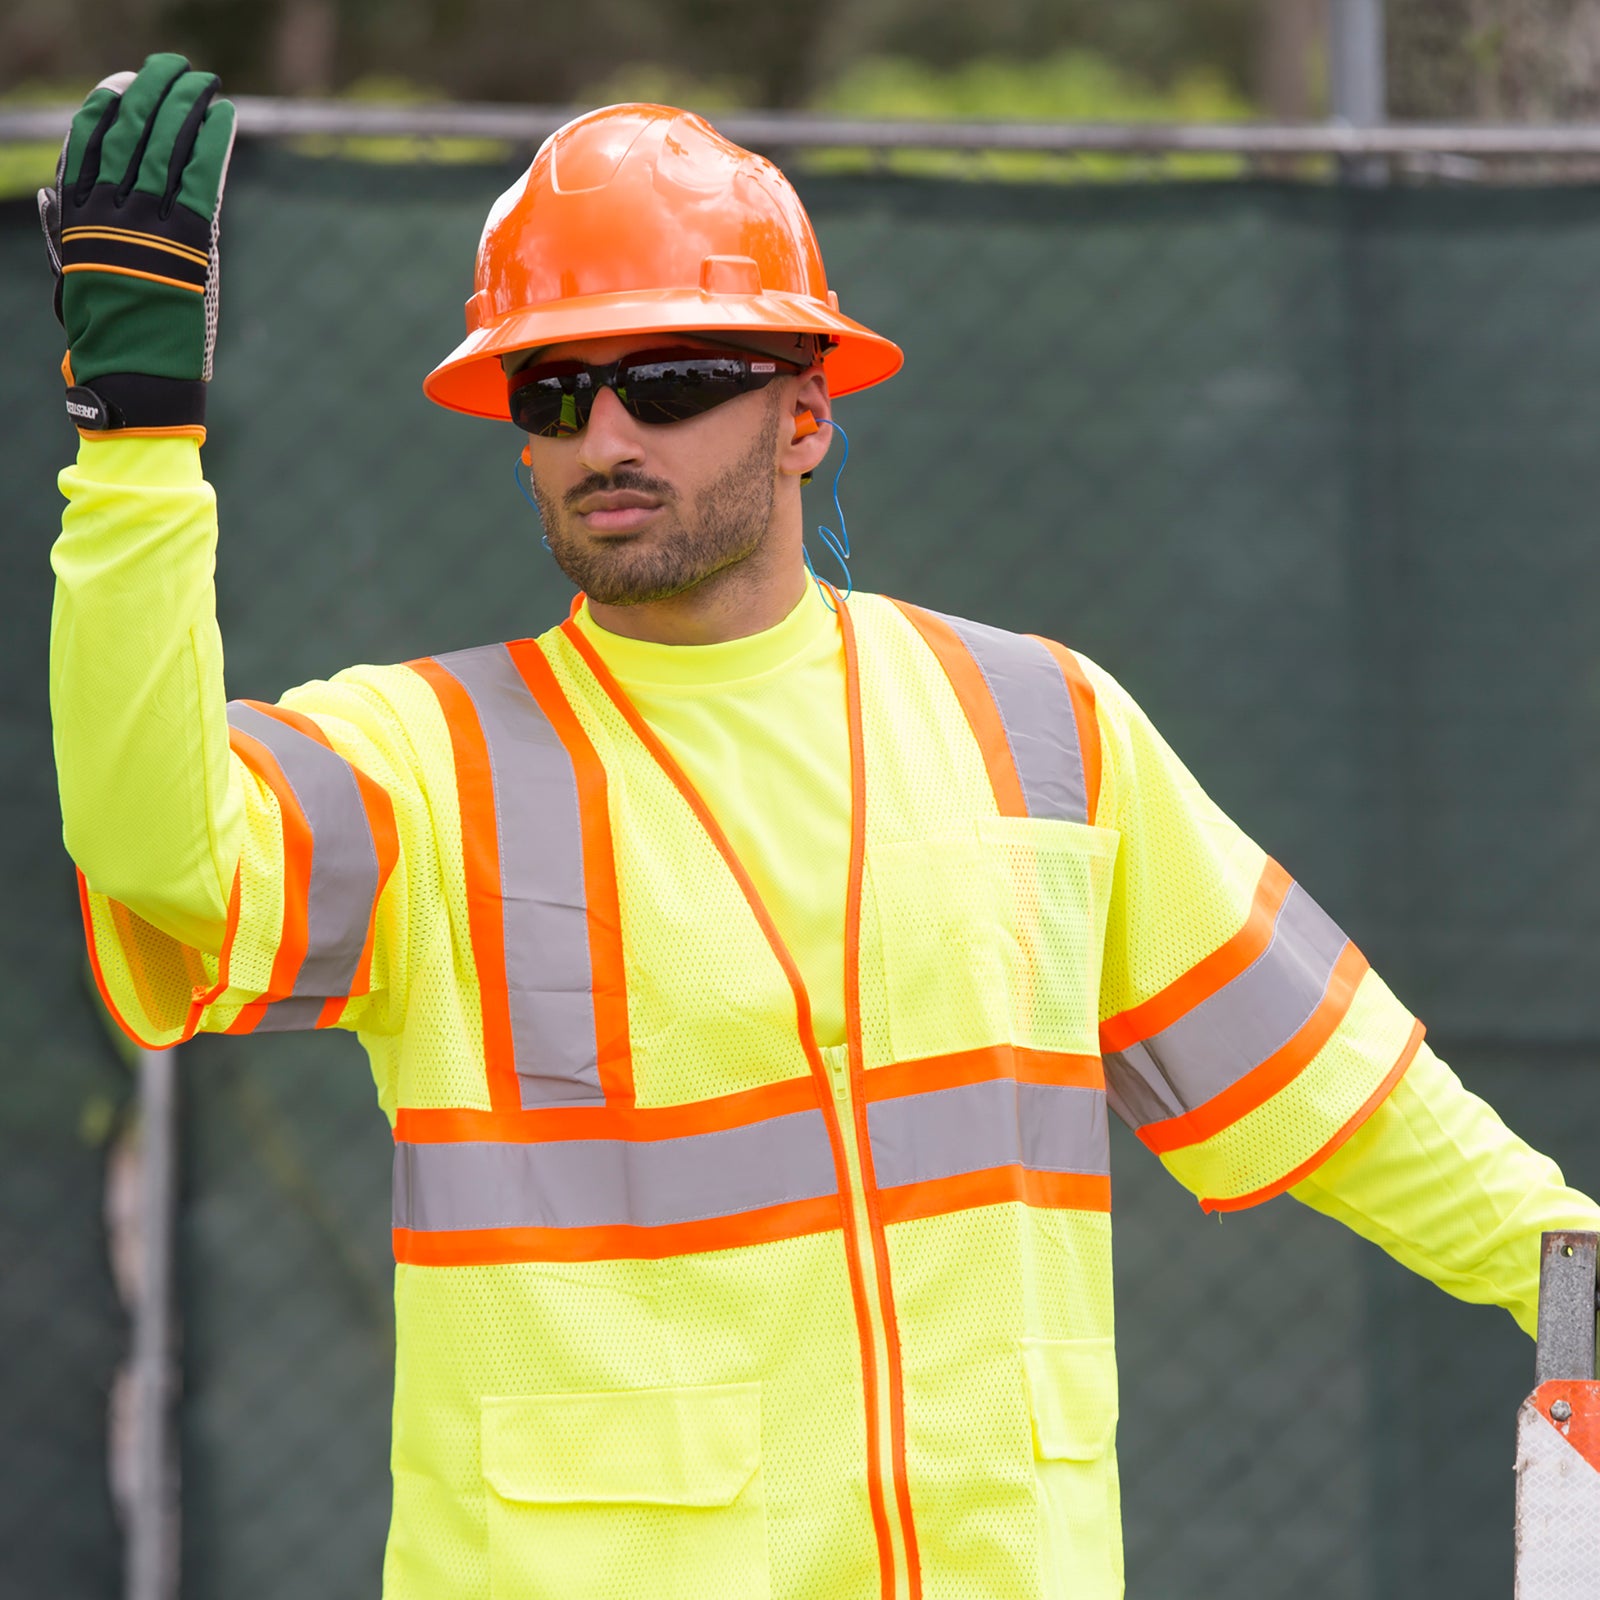 A worker directing traffic wearing yellow high visibility reflective clothing, an orange hard hat and the JORESTECH smoke safety glasses for high impact protection during a road construction.